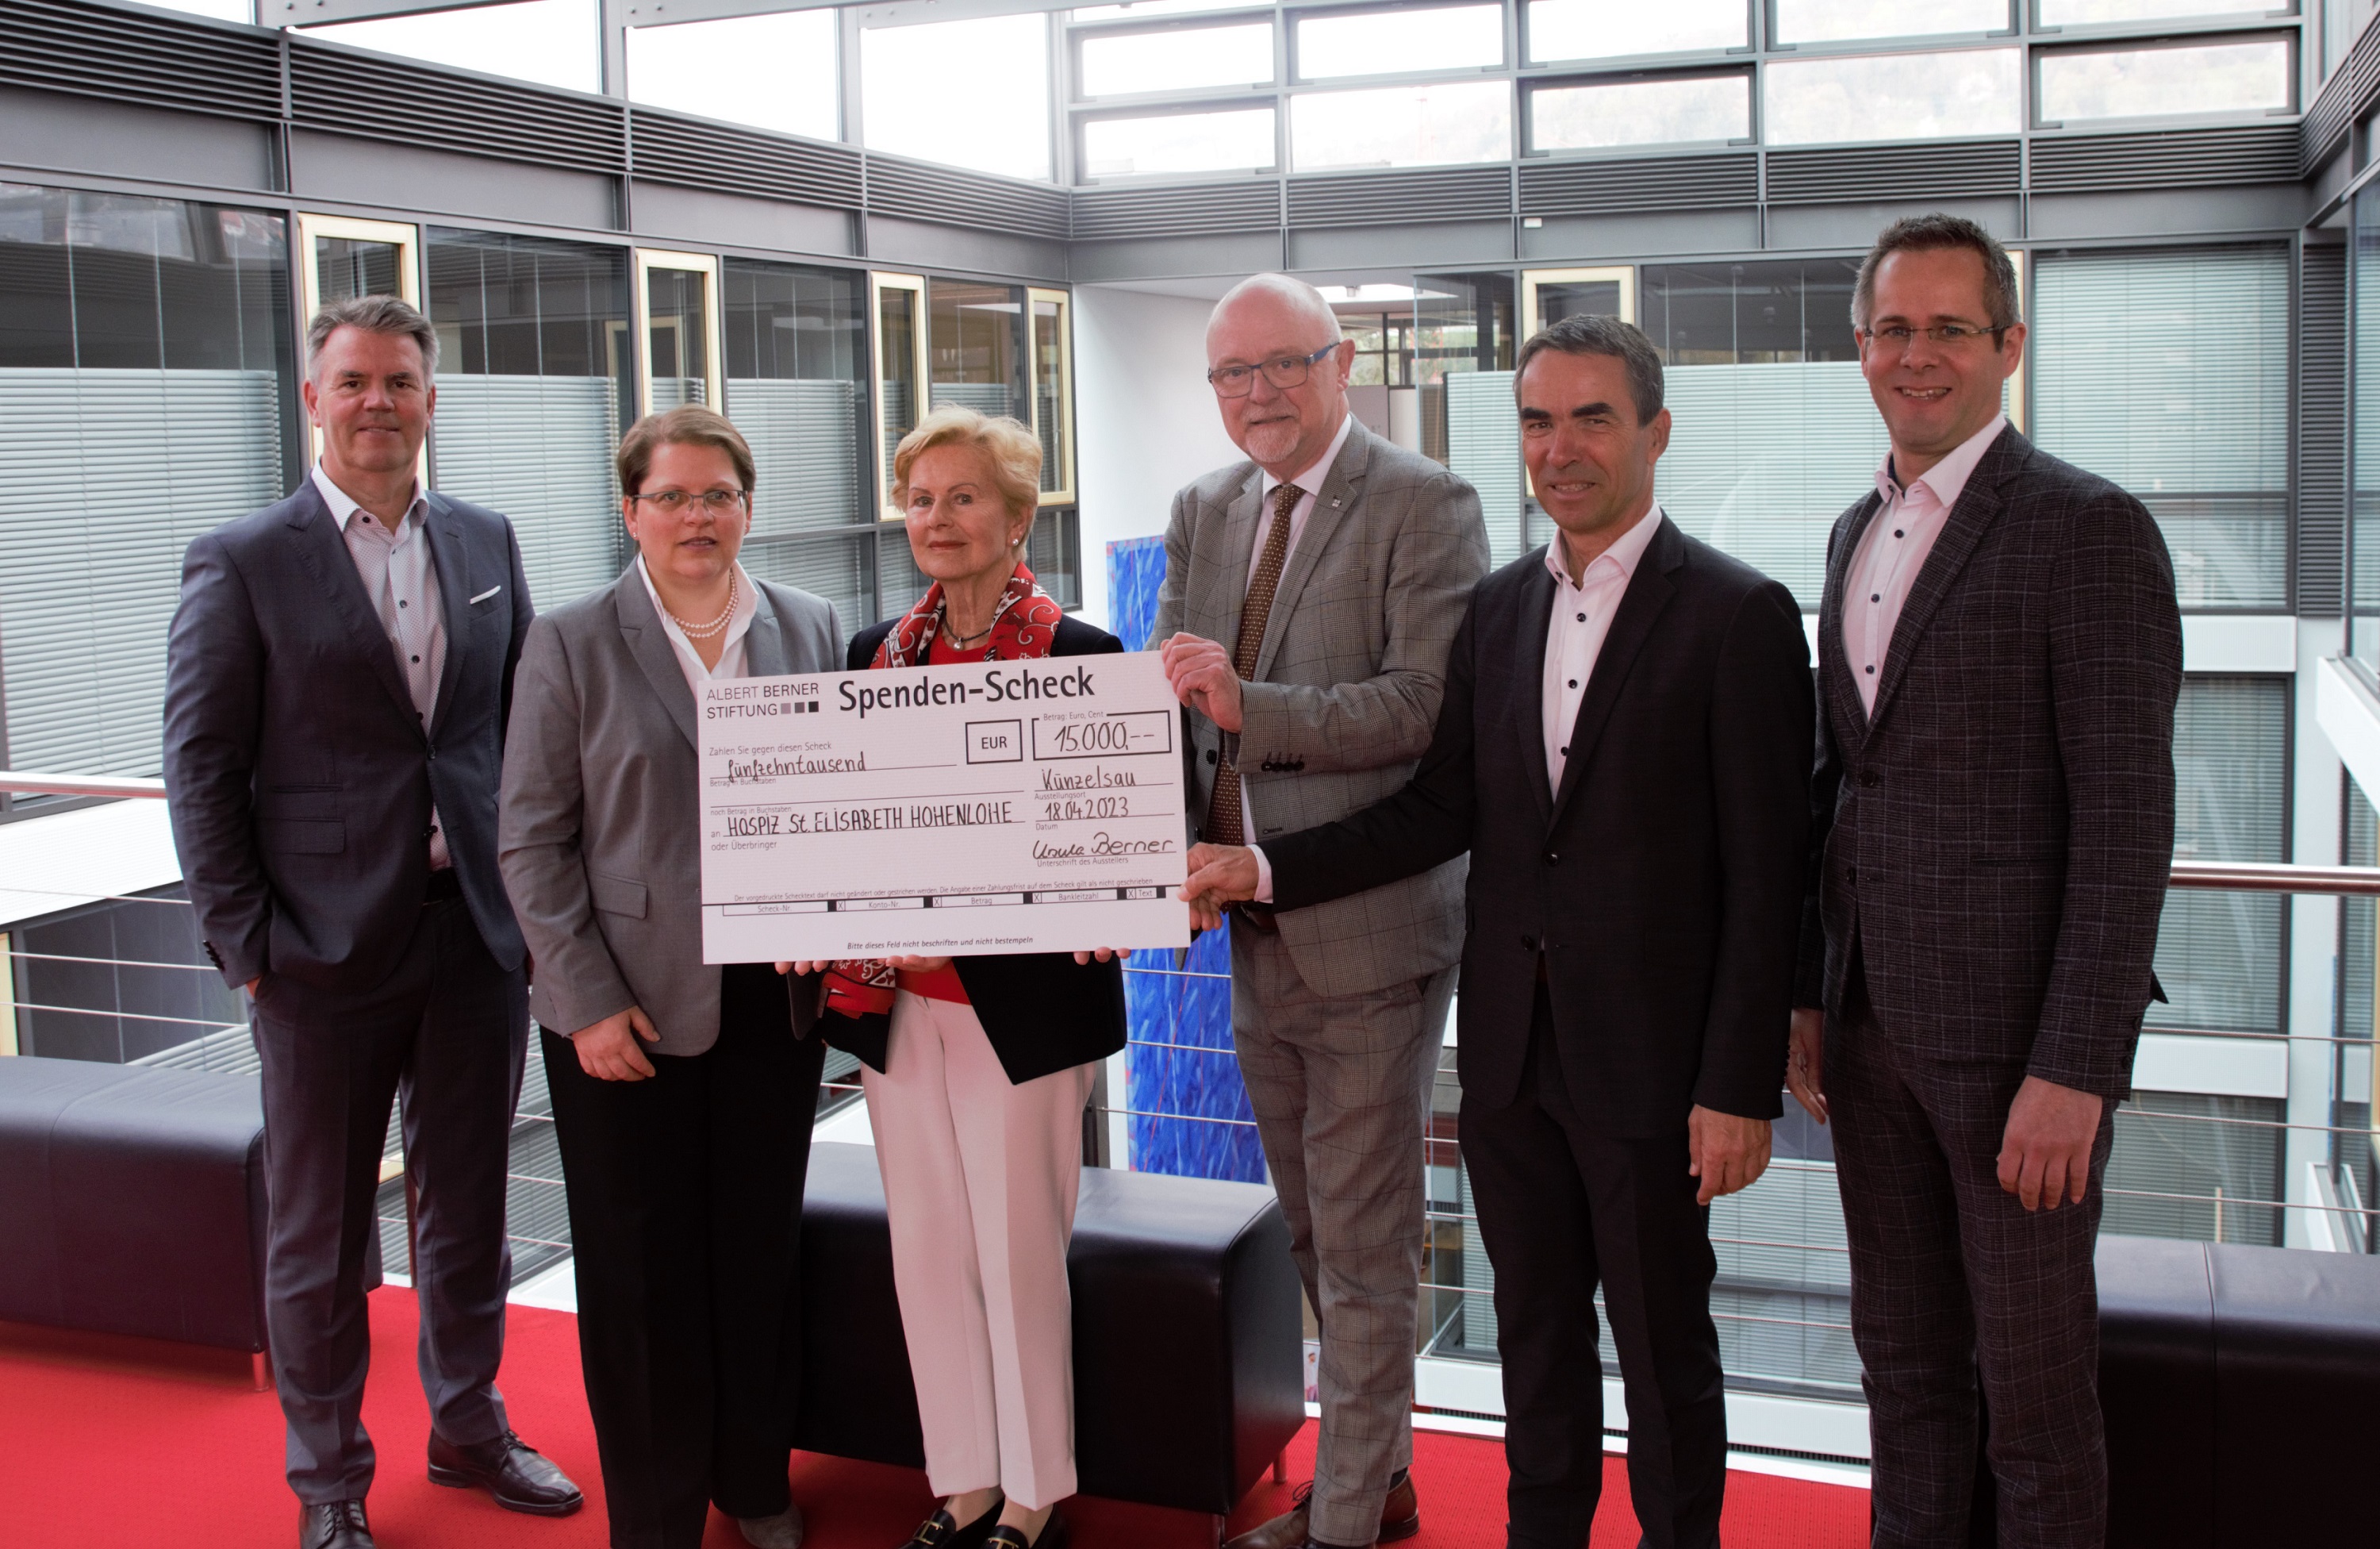 Record proceeds: charity concert raises almost 10,000 eu-ros for St Elisabeth Hospice Hohenlohe Berner Group